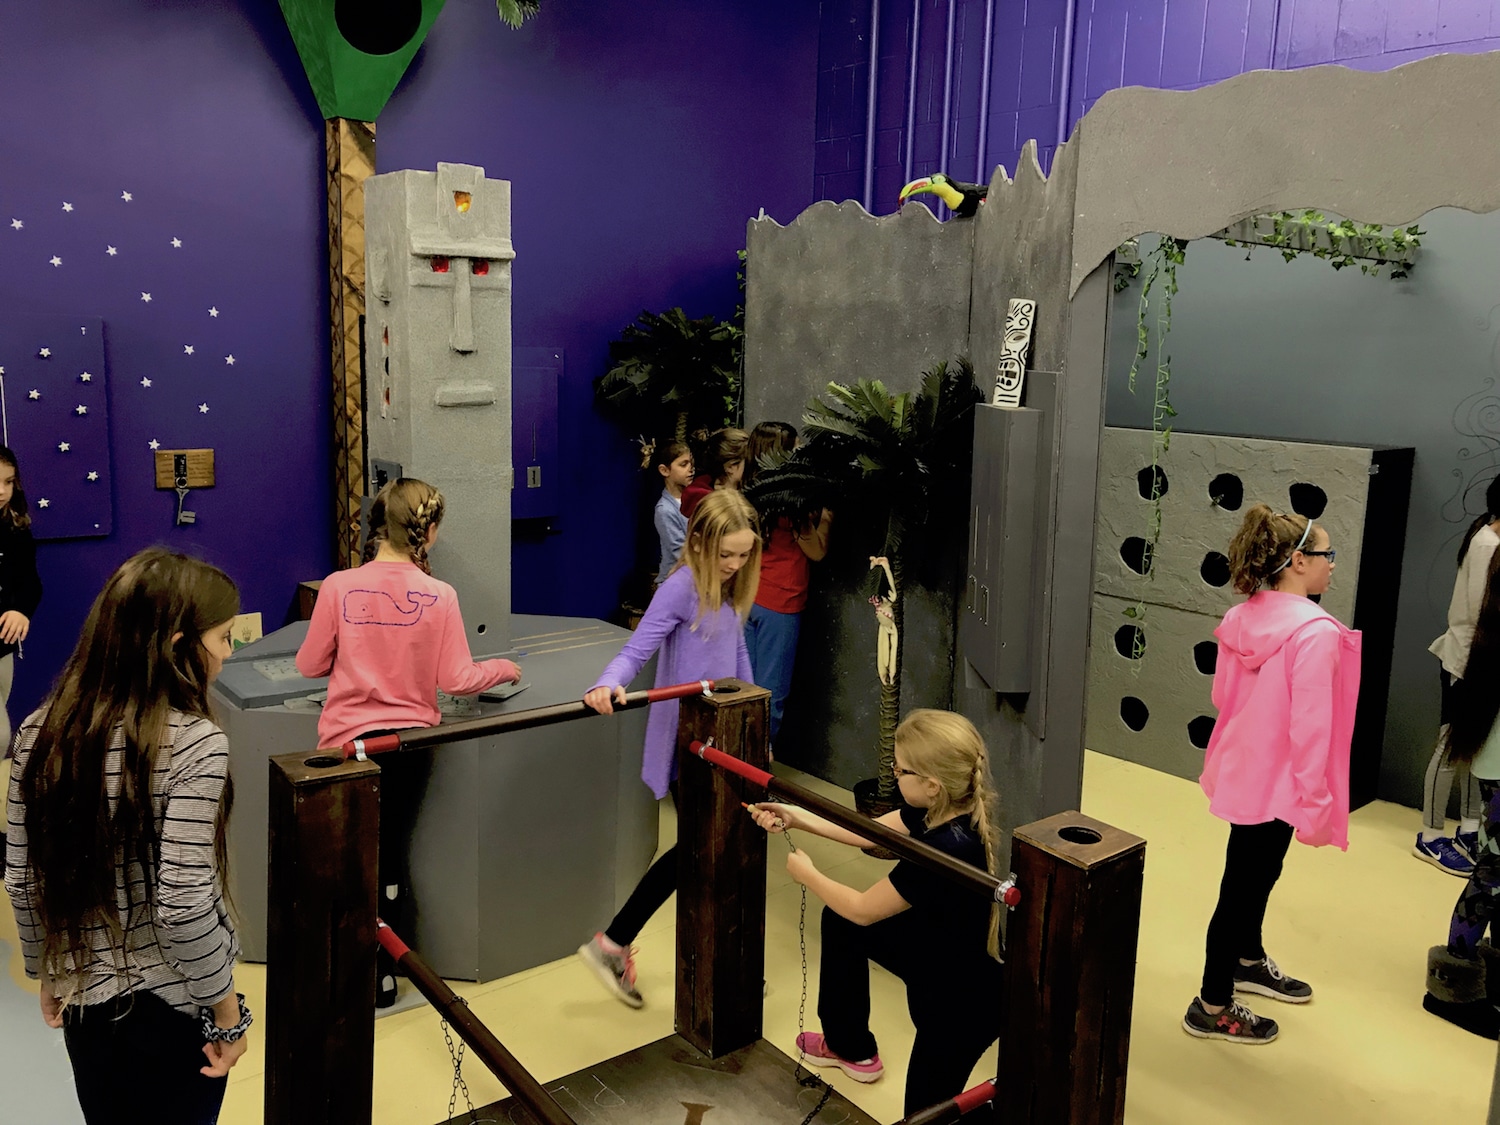 Children playing in a play area, following Clear Safety Guidelines and Provisions